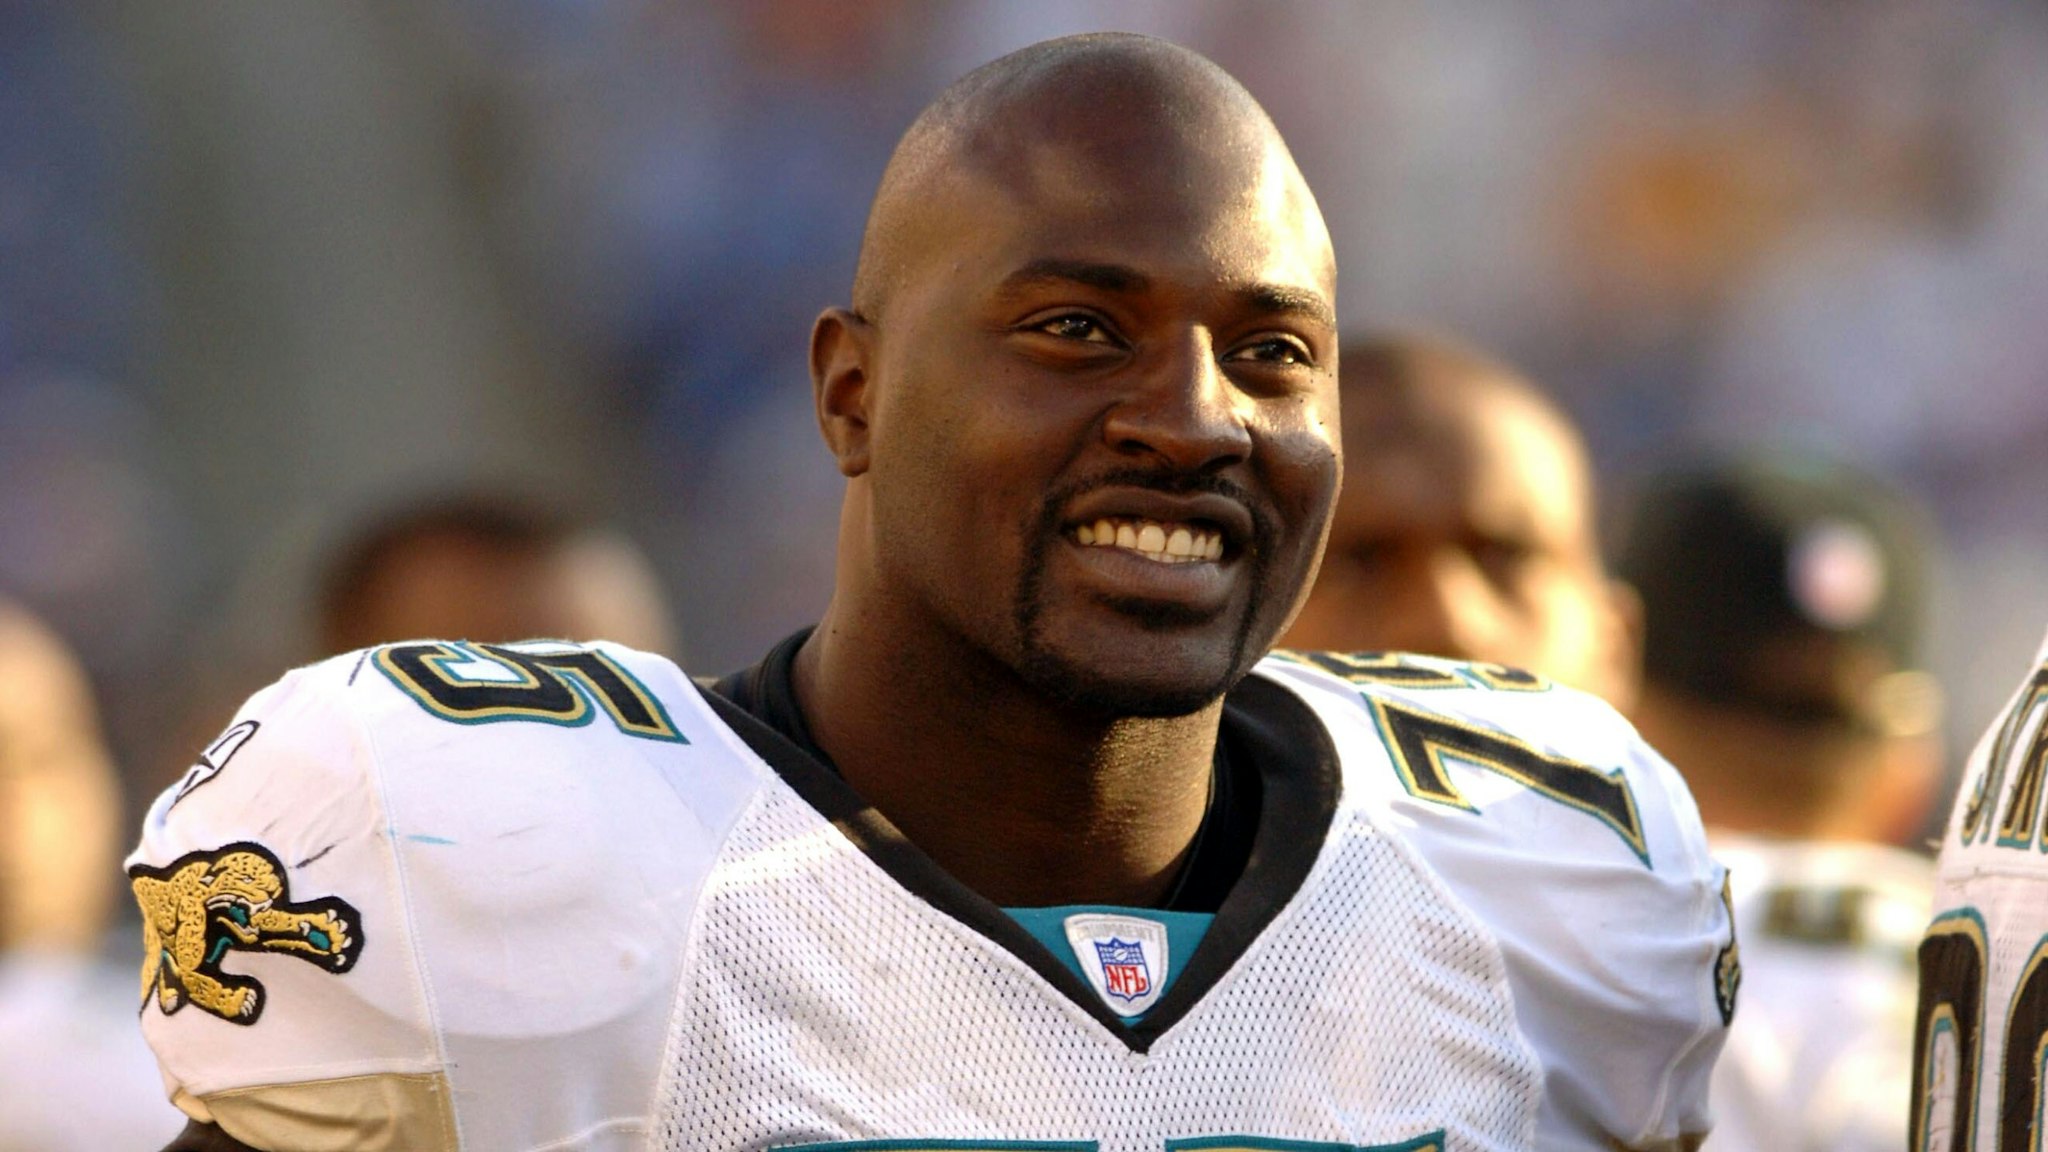 Marcellus Wiley #75 smiles after the Jaguars victory. The Jacksonville Jaguars beat the Tennessee Titans 31-28 on November 20, 2005.